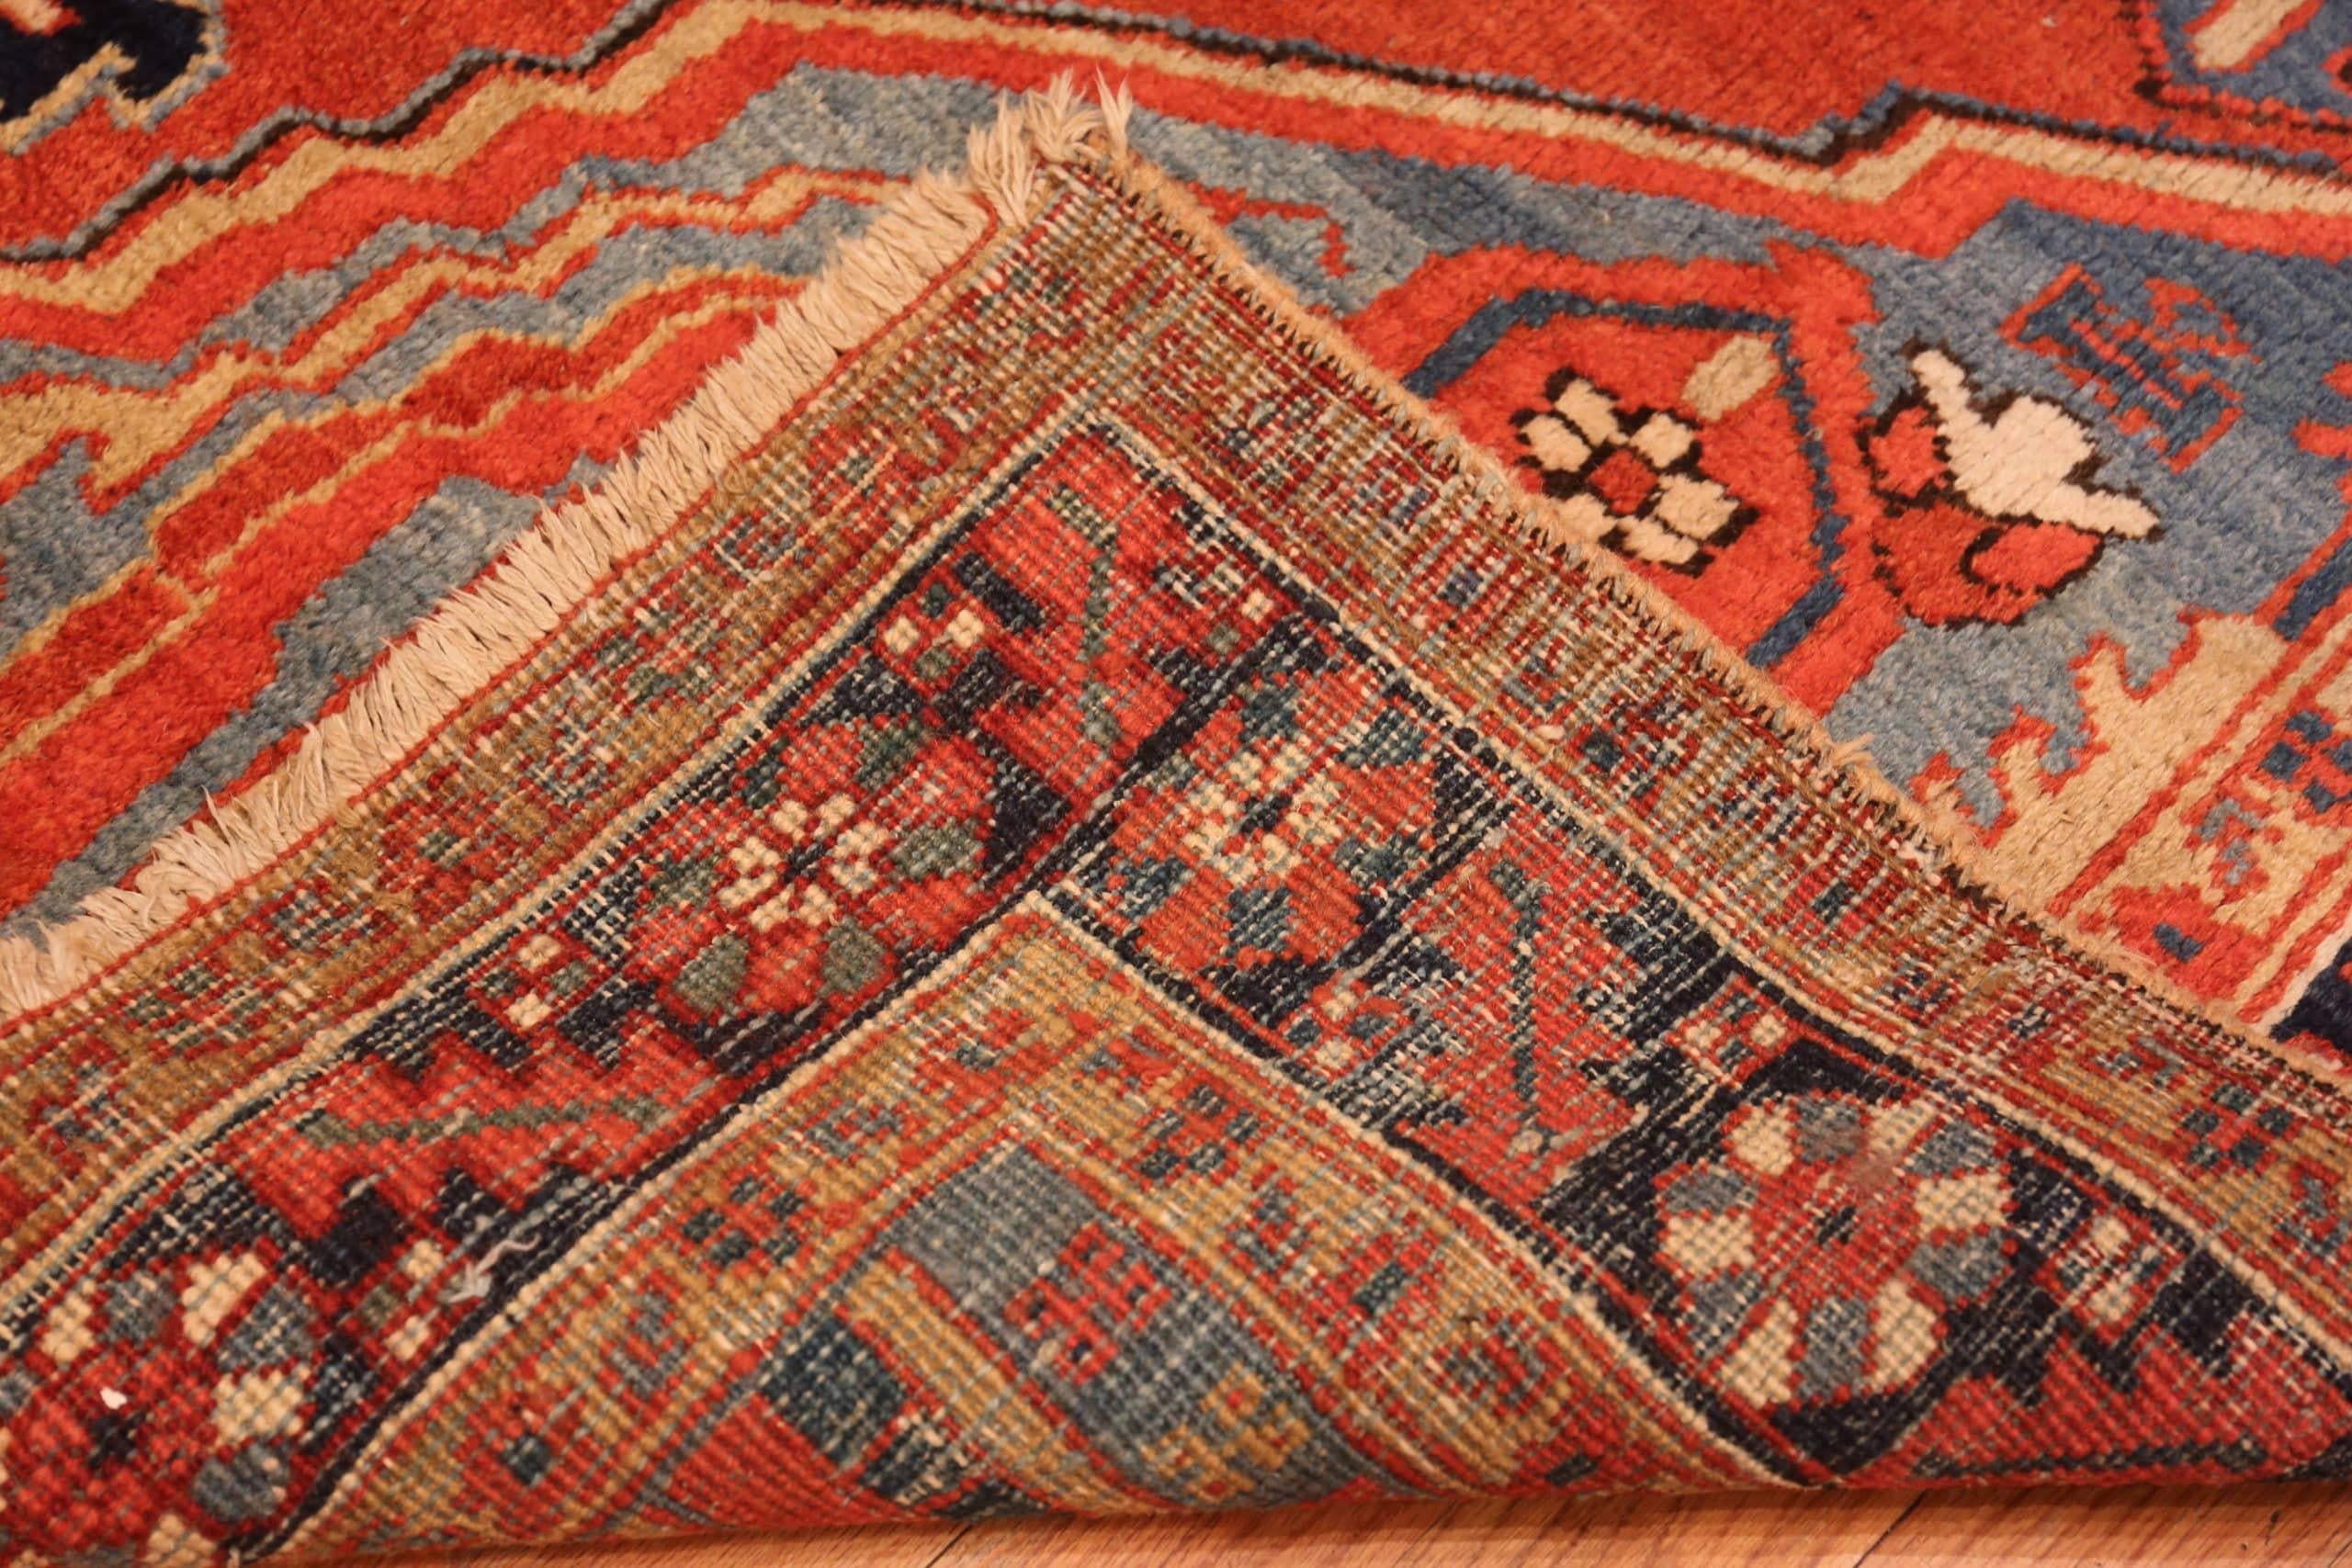 Small Antique Persian Heriz Rug. Size: 6 ft 5 in x 8 ft 3